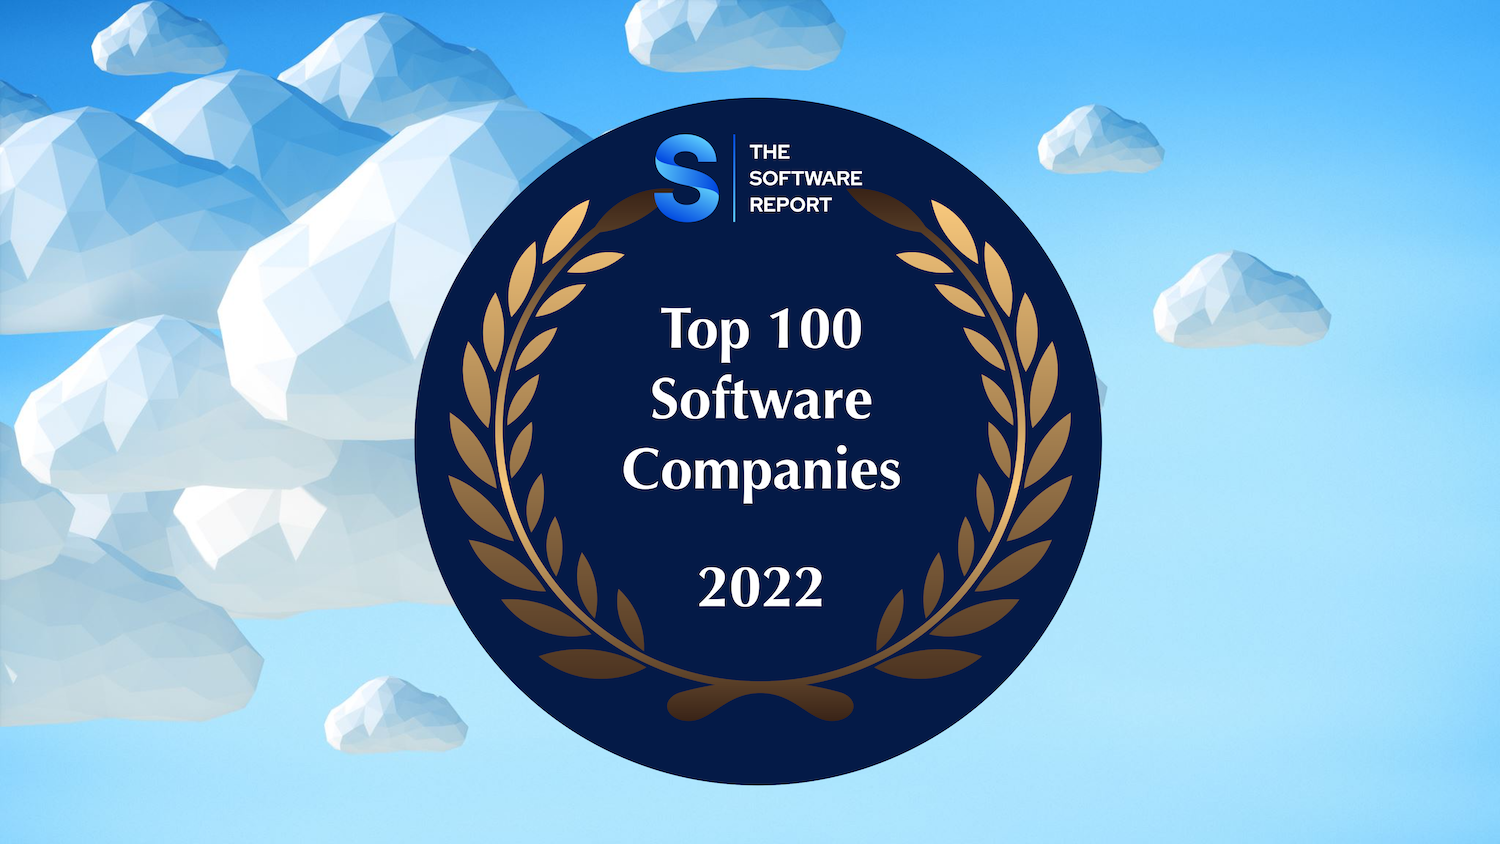 The Top 100 Software Companies of 2022